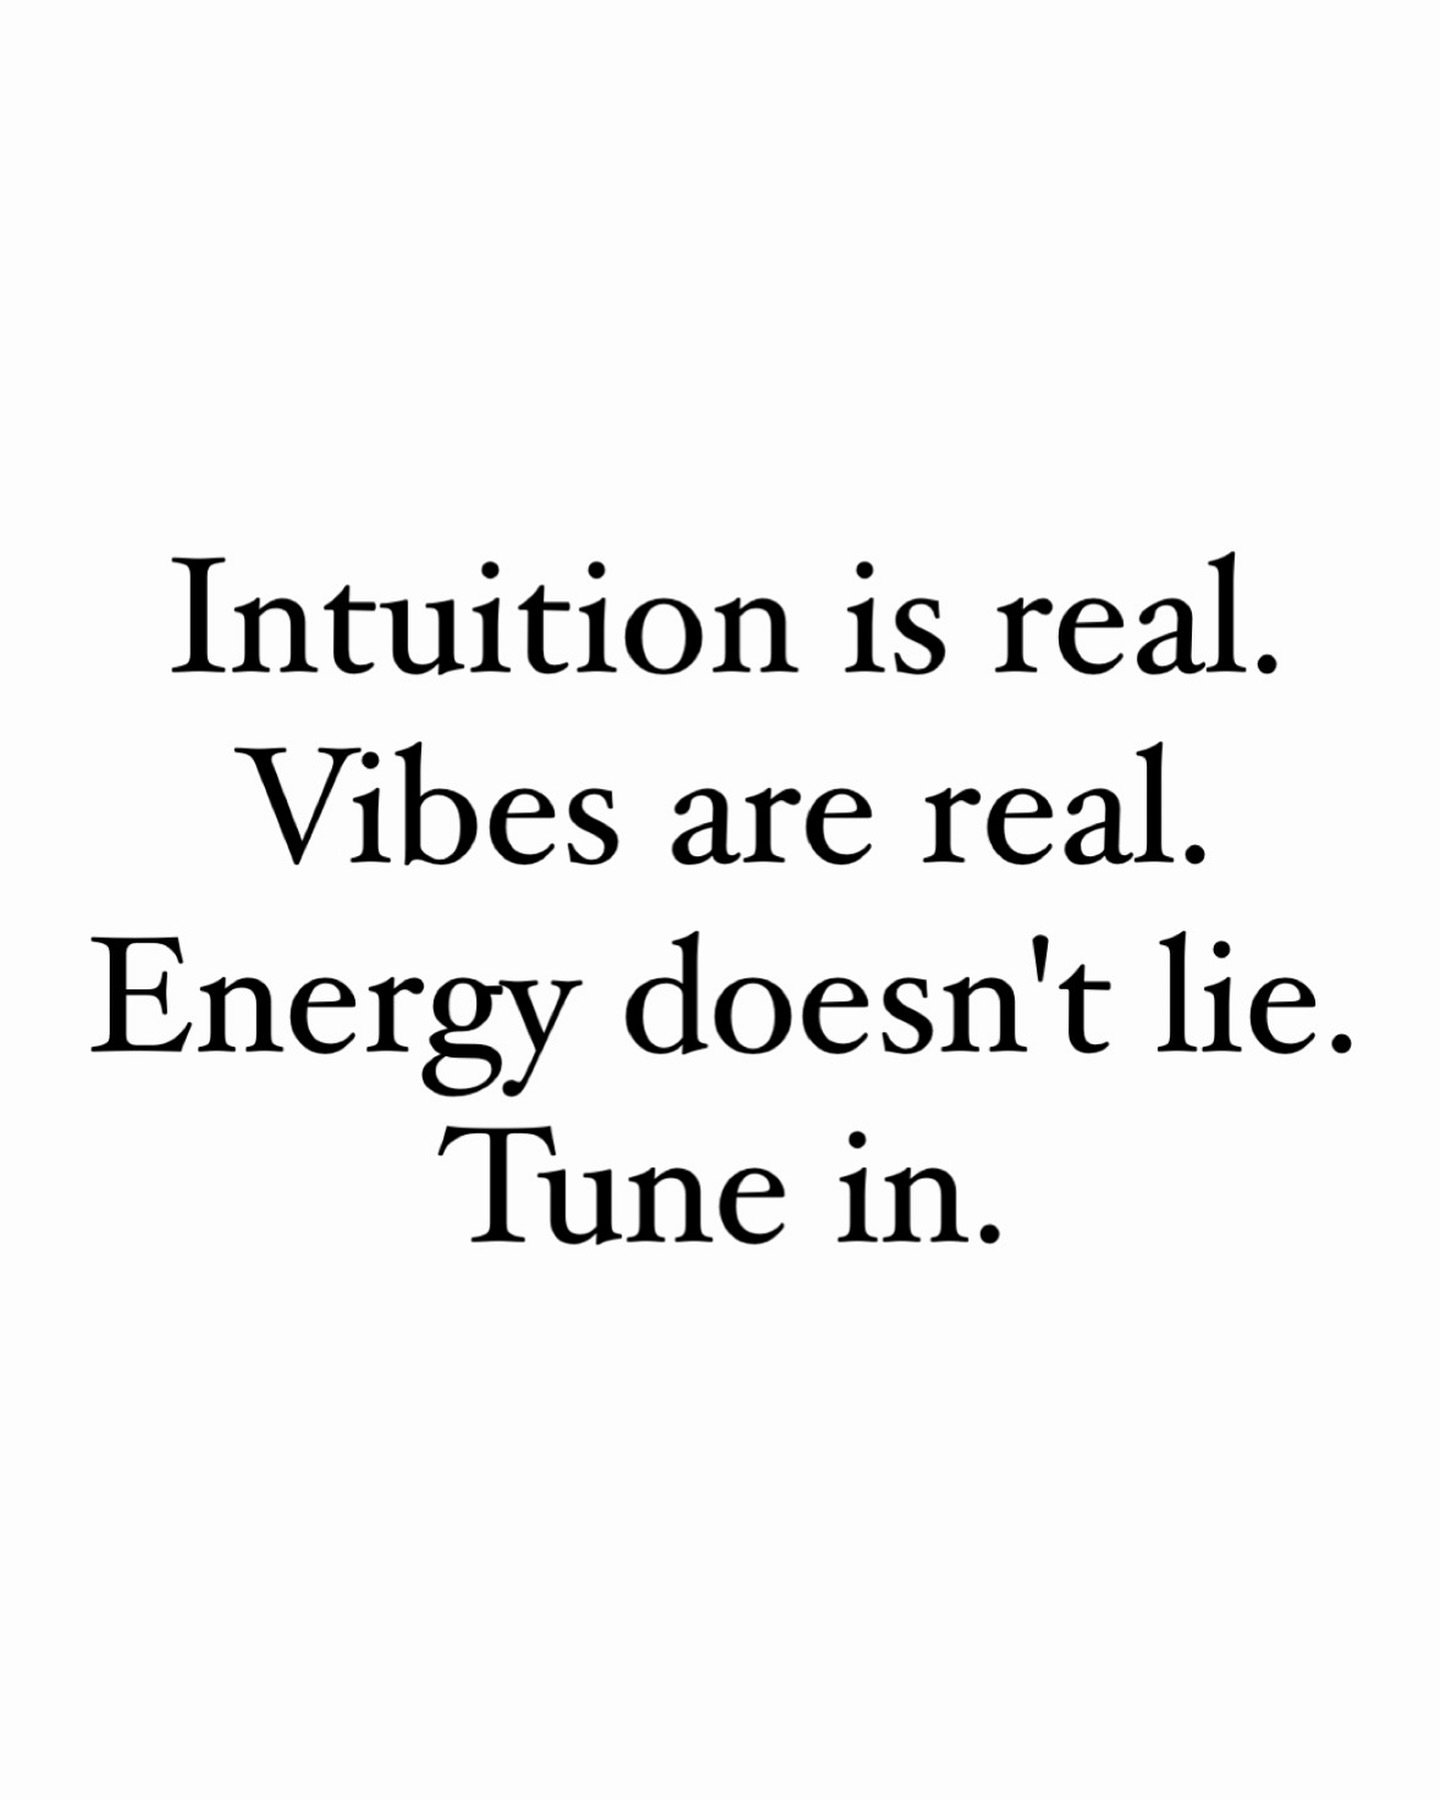 Your intuition is your greatest superpower&hellip;don&rsquo;t ever let anyone try to convince you it&rsquo;s just your insecurities.

Your intuition is real, it&rsquo;s a voice that will tell you something is just not adding up or a feeling deep in y